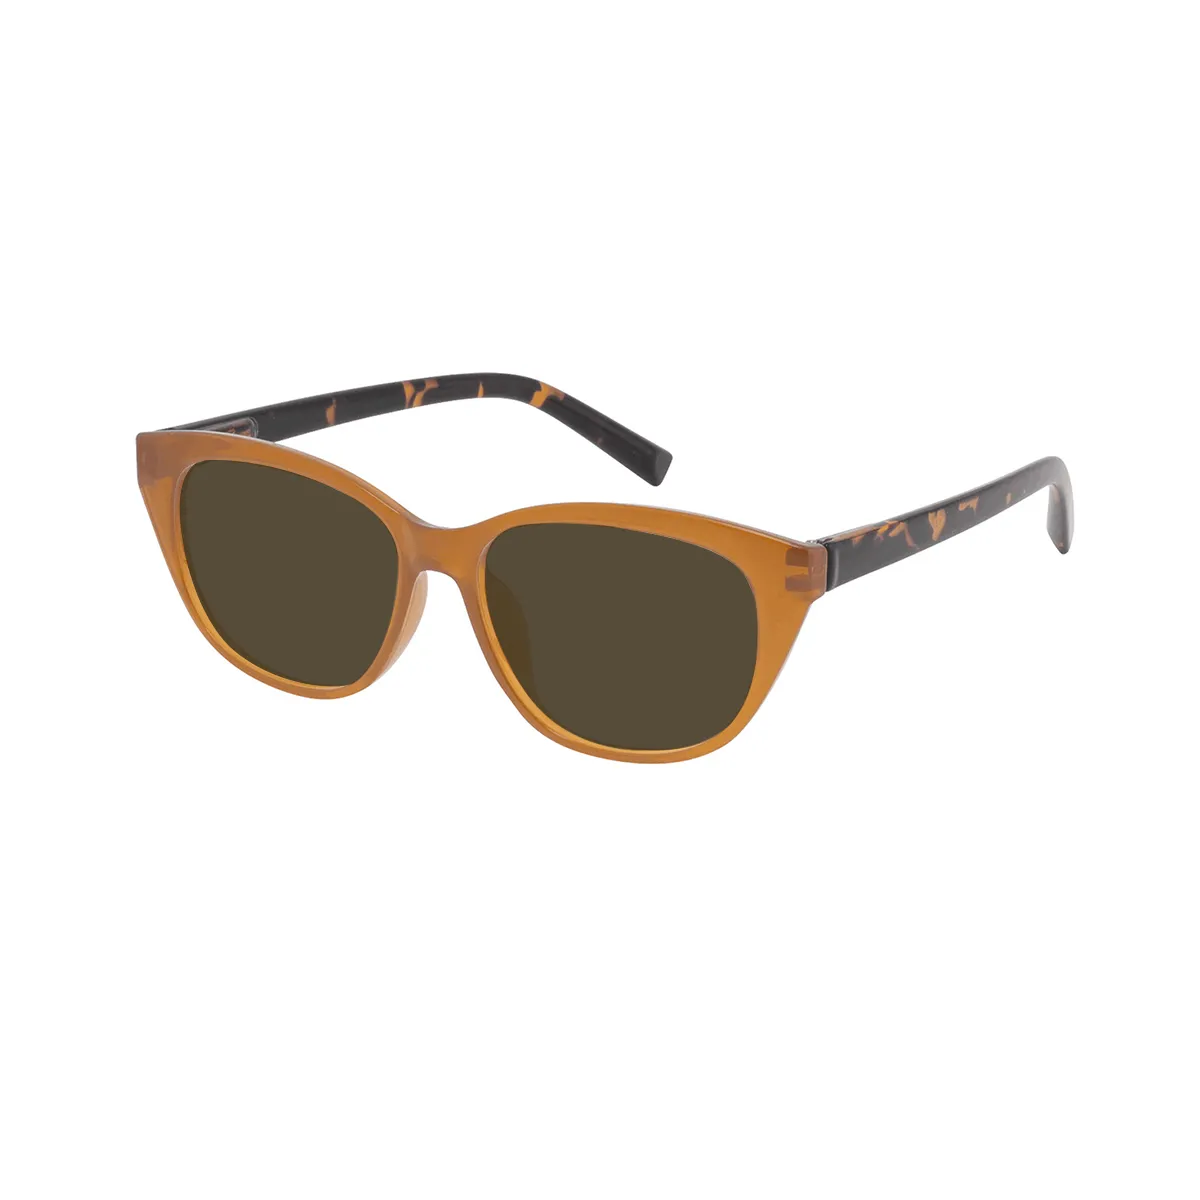 Catharine - Oval Brown Sunglasses for Women